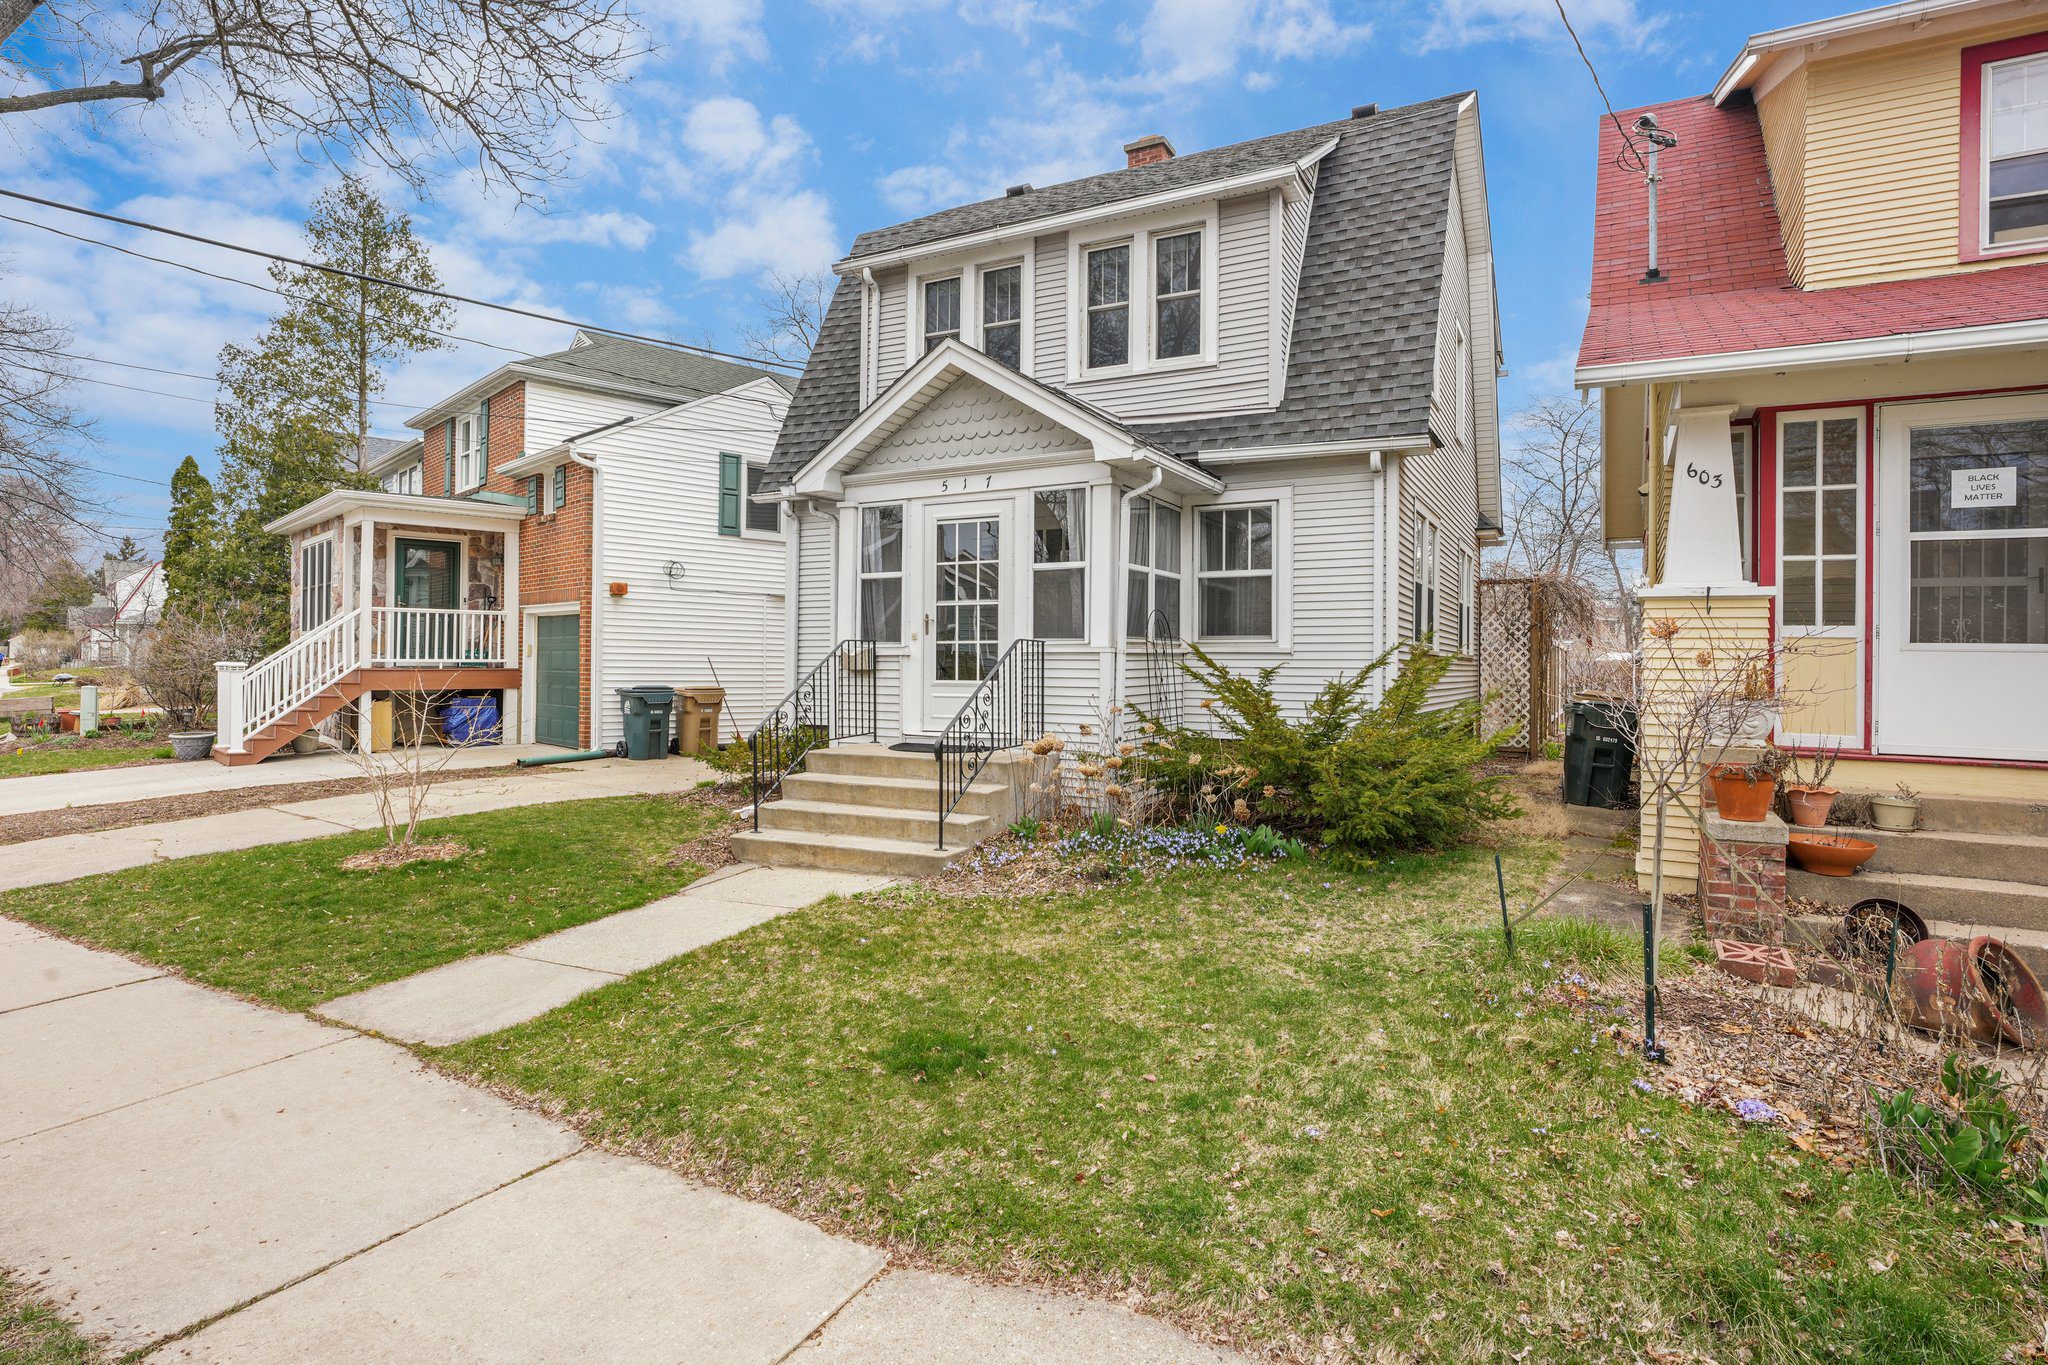 2-web-or-mls-517-russell-st